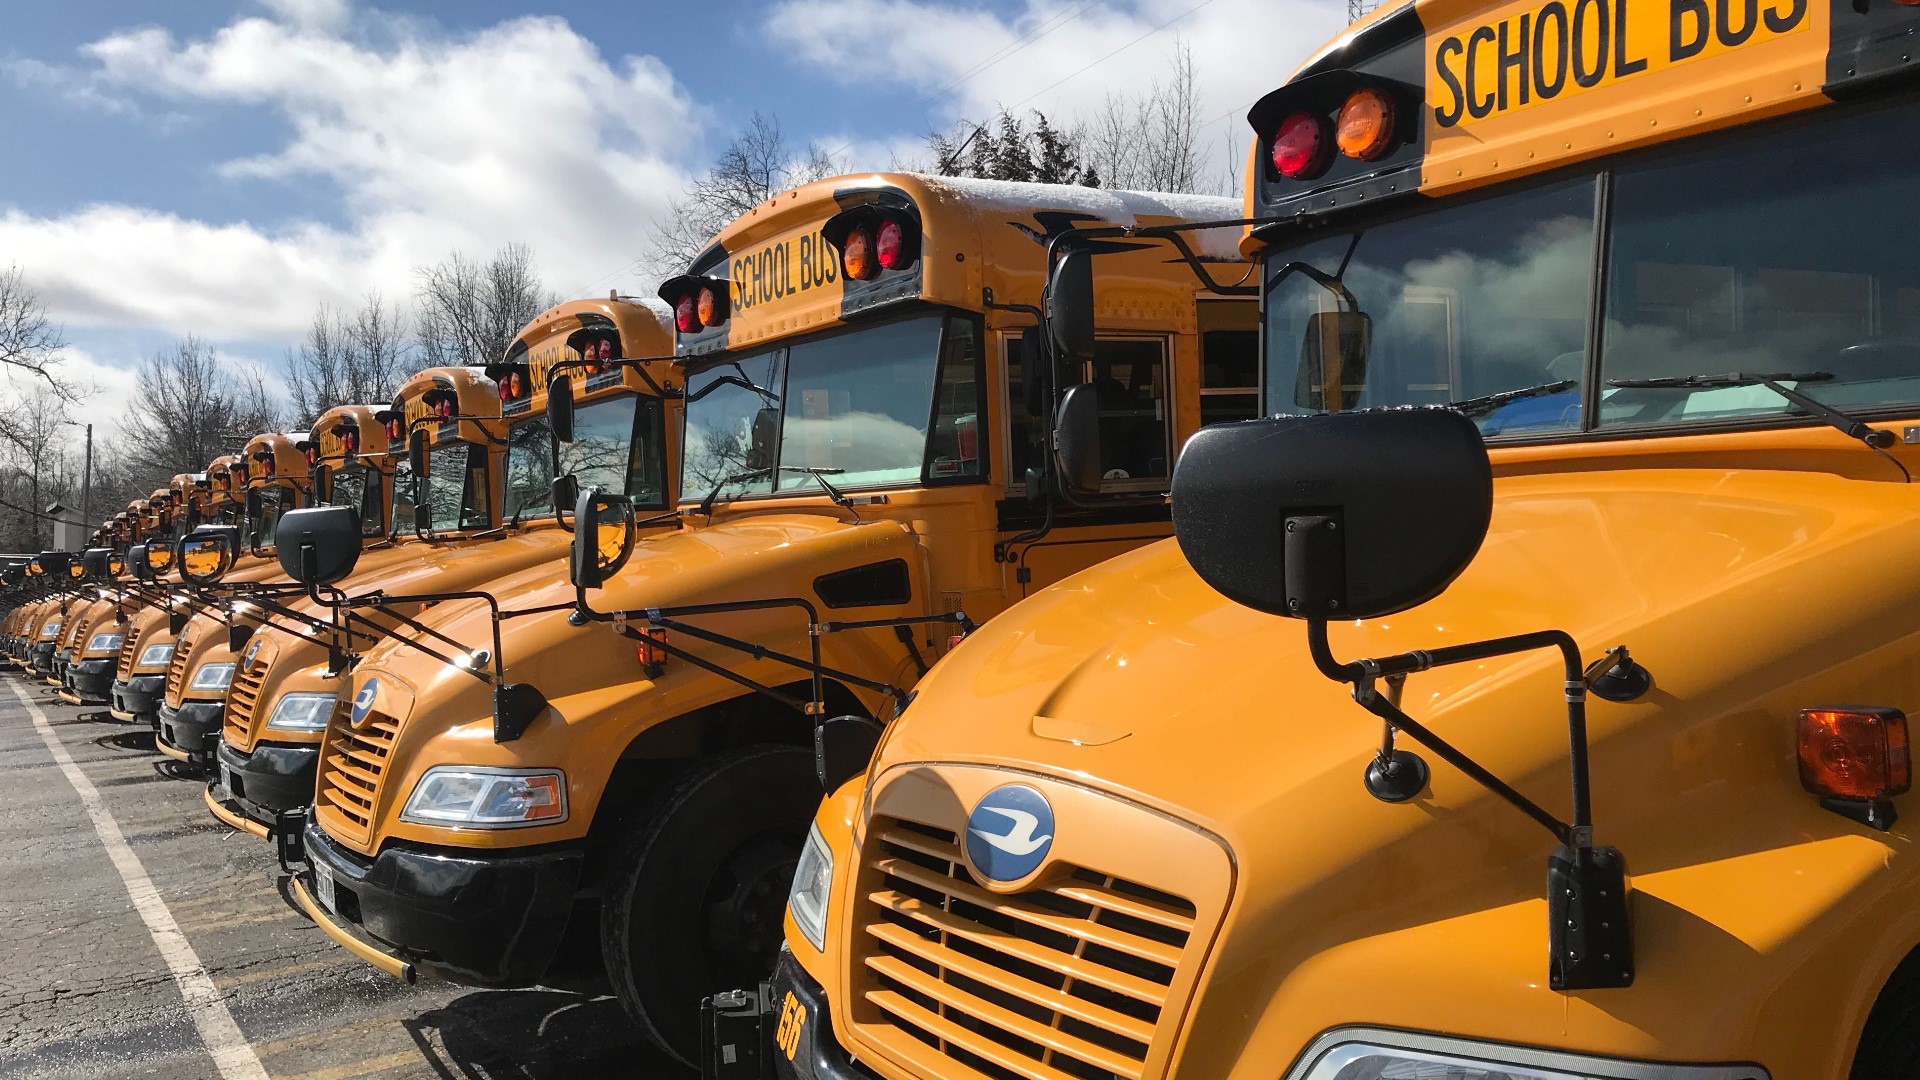 The report cards are in for how safe your kids' buses are.